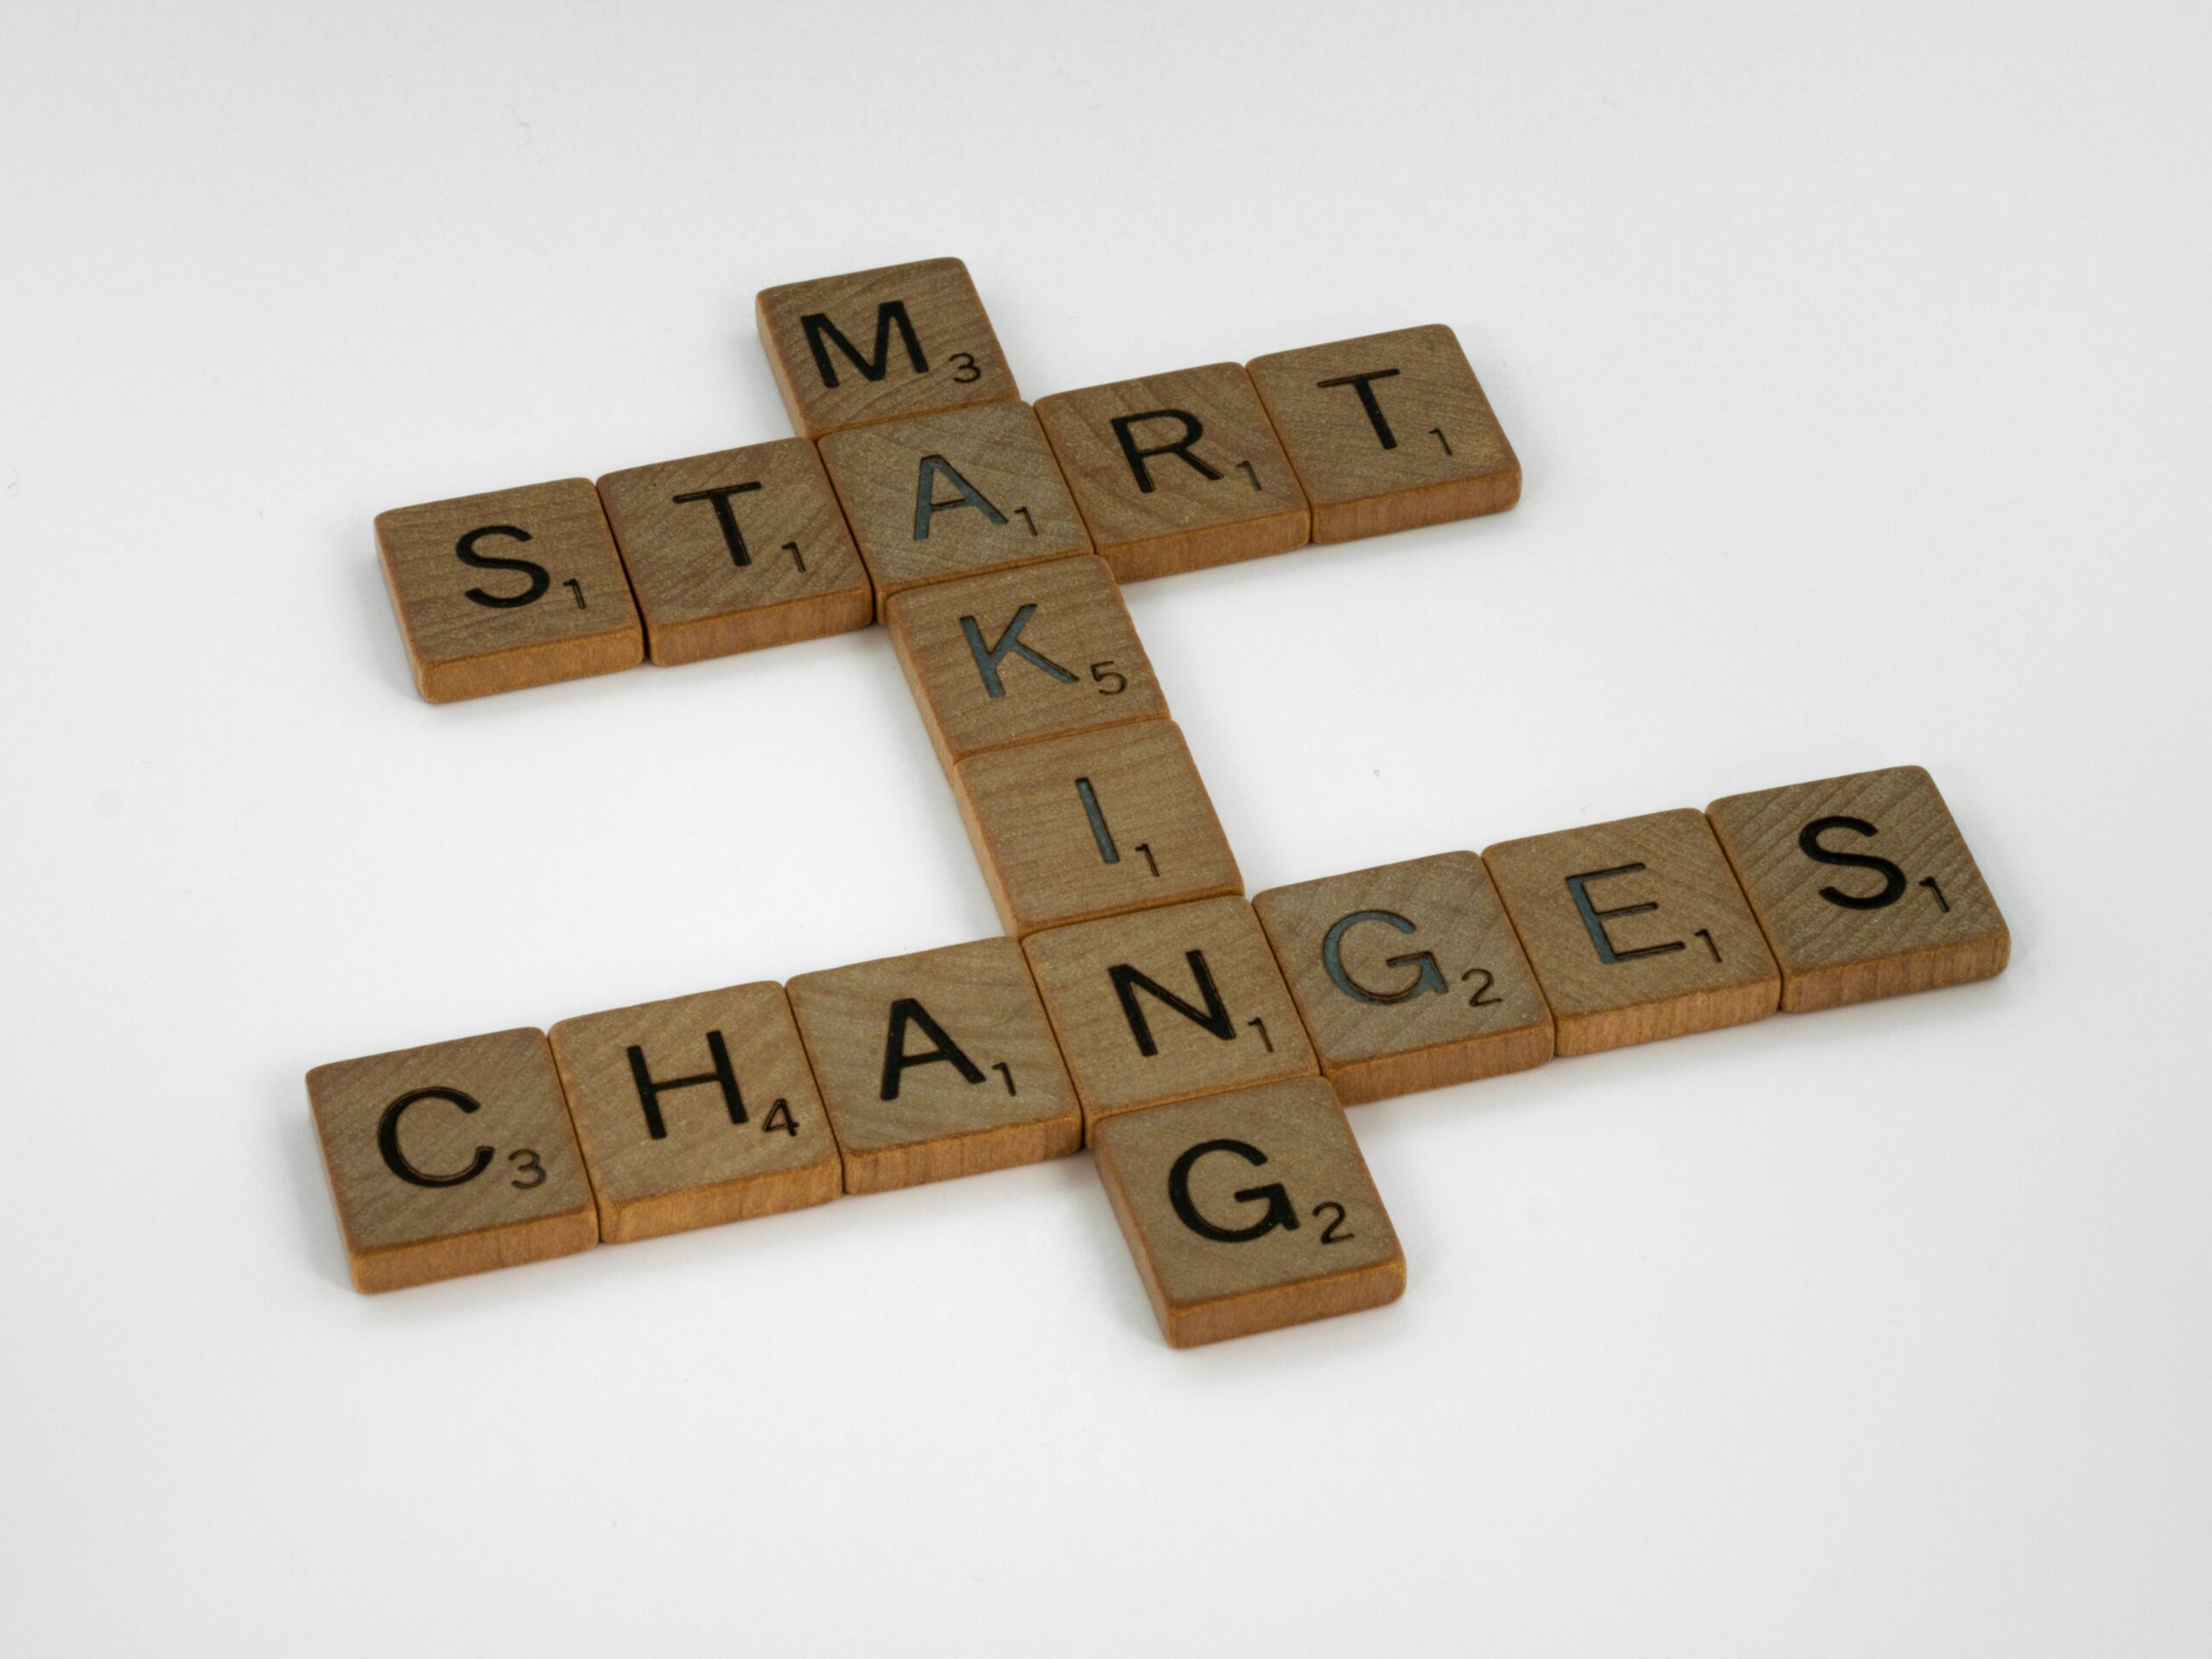 An image of wooden letters spelling out "making smart changes". Learn how to make smarter changes with the help of a culturally sensitive therapist in Brooklyn, NY. Search for mindfluness therapy in Brooklyn, NY and the help therapy in Bedstuy can offer.